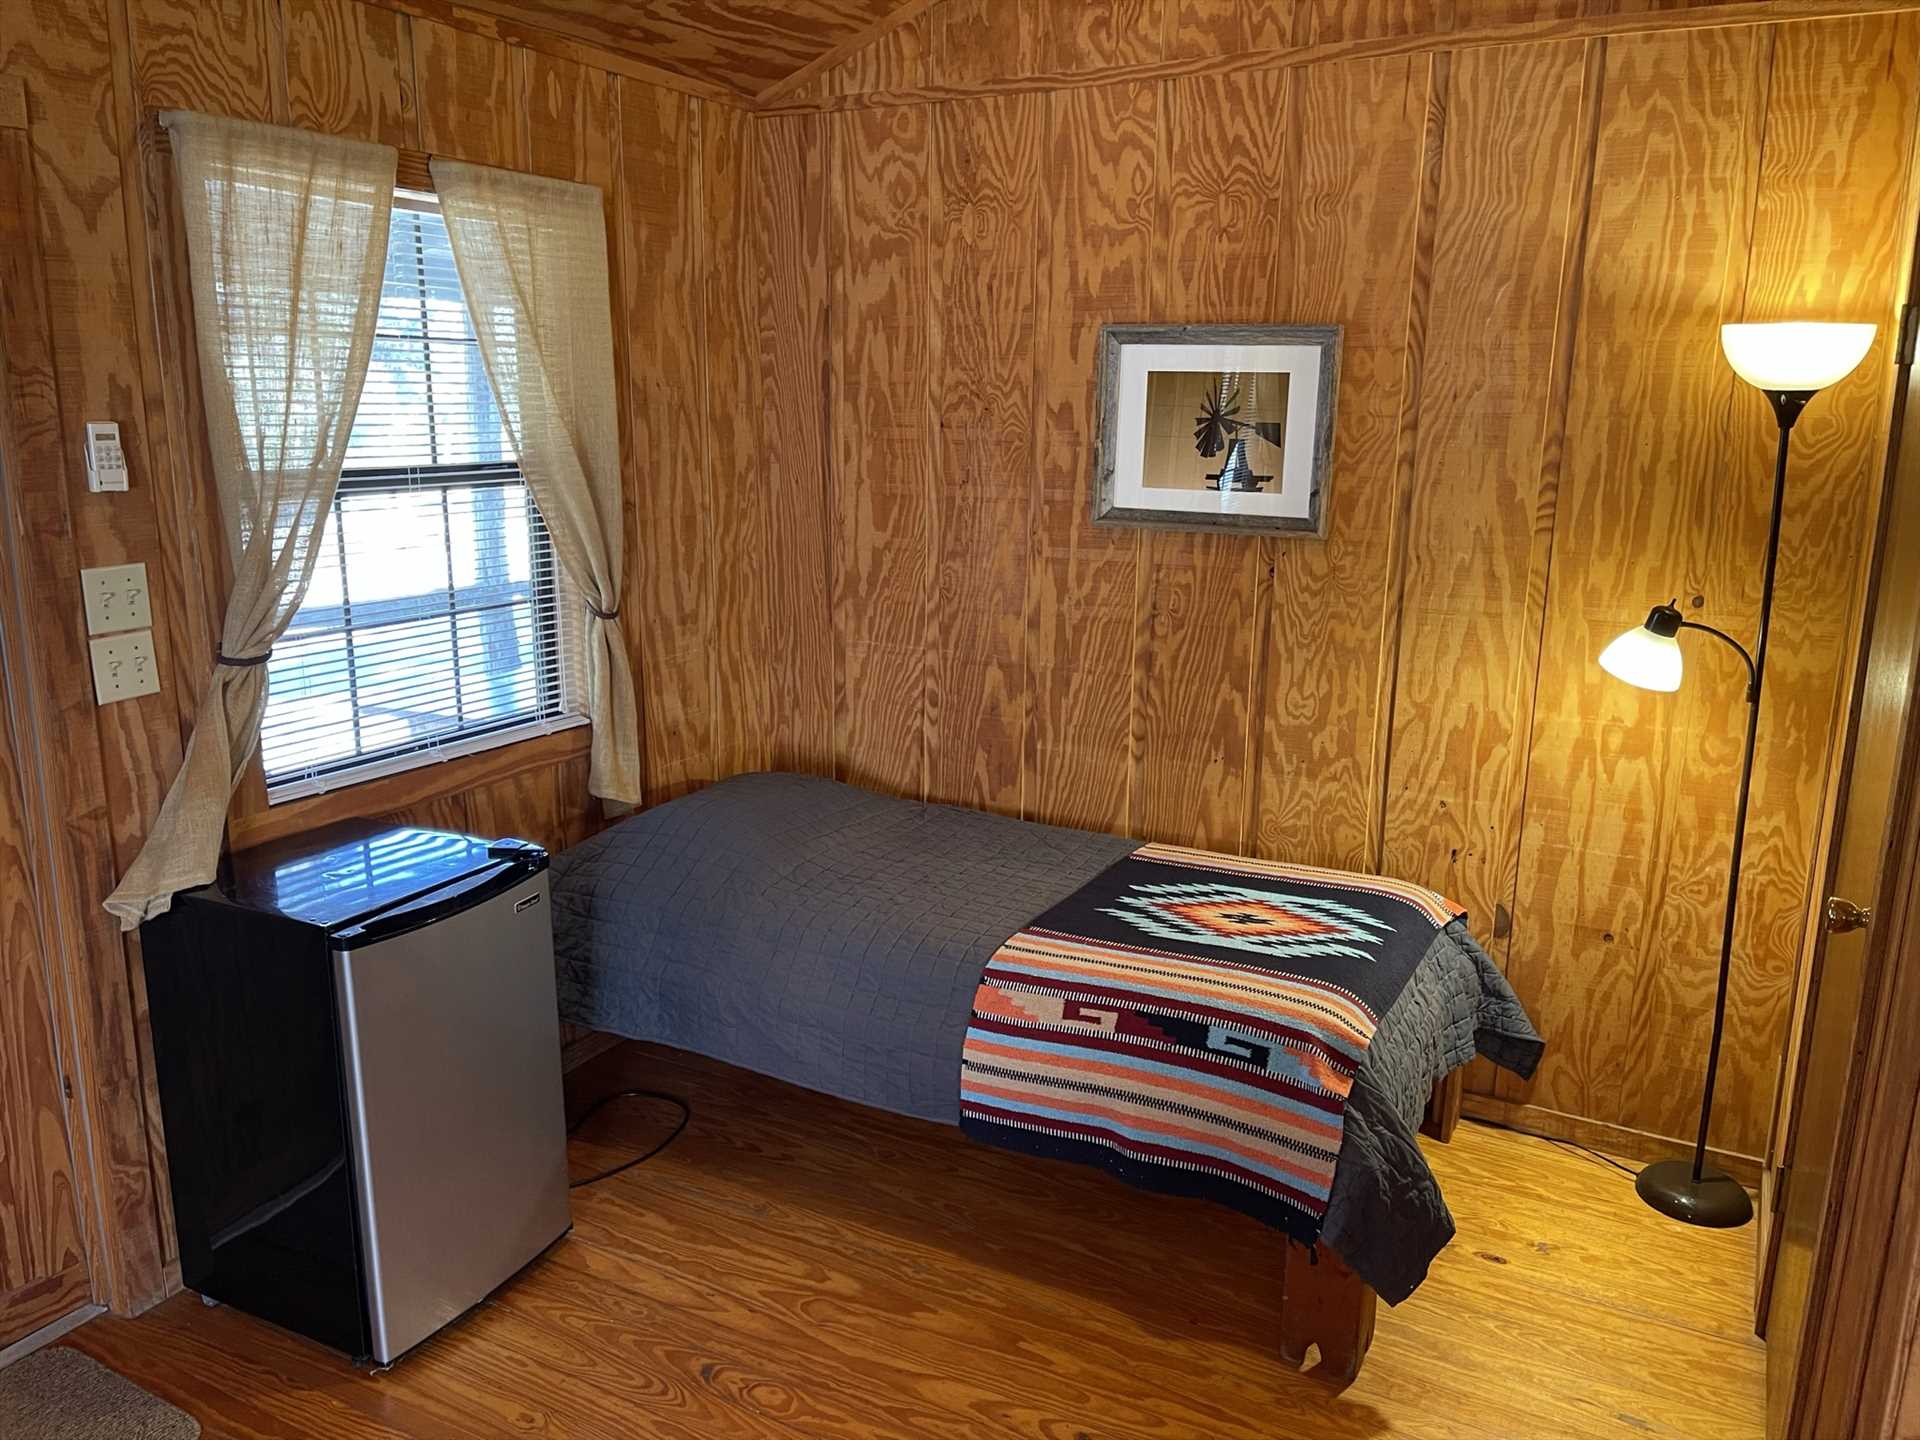                                                 Your private space includes a mini fridge, and the shared Lodge nearby has grills, an ice machine, and more!